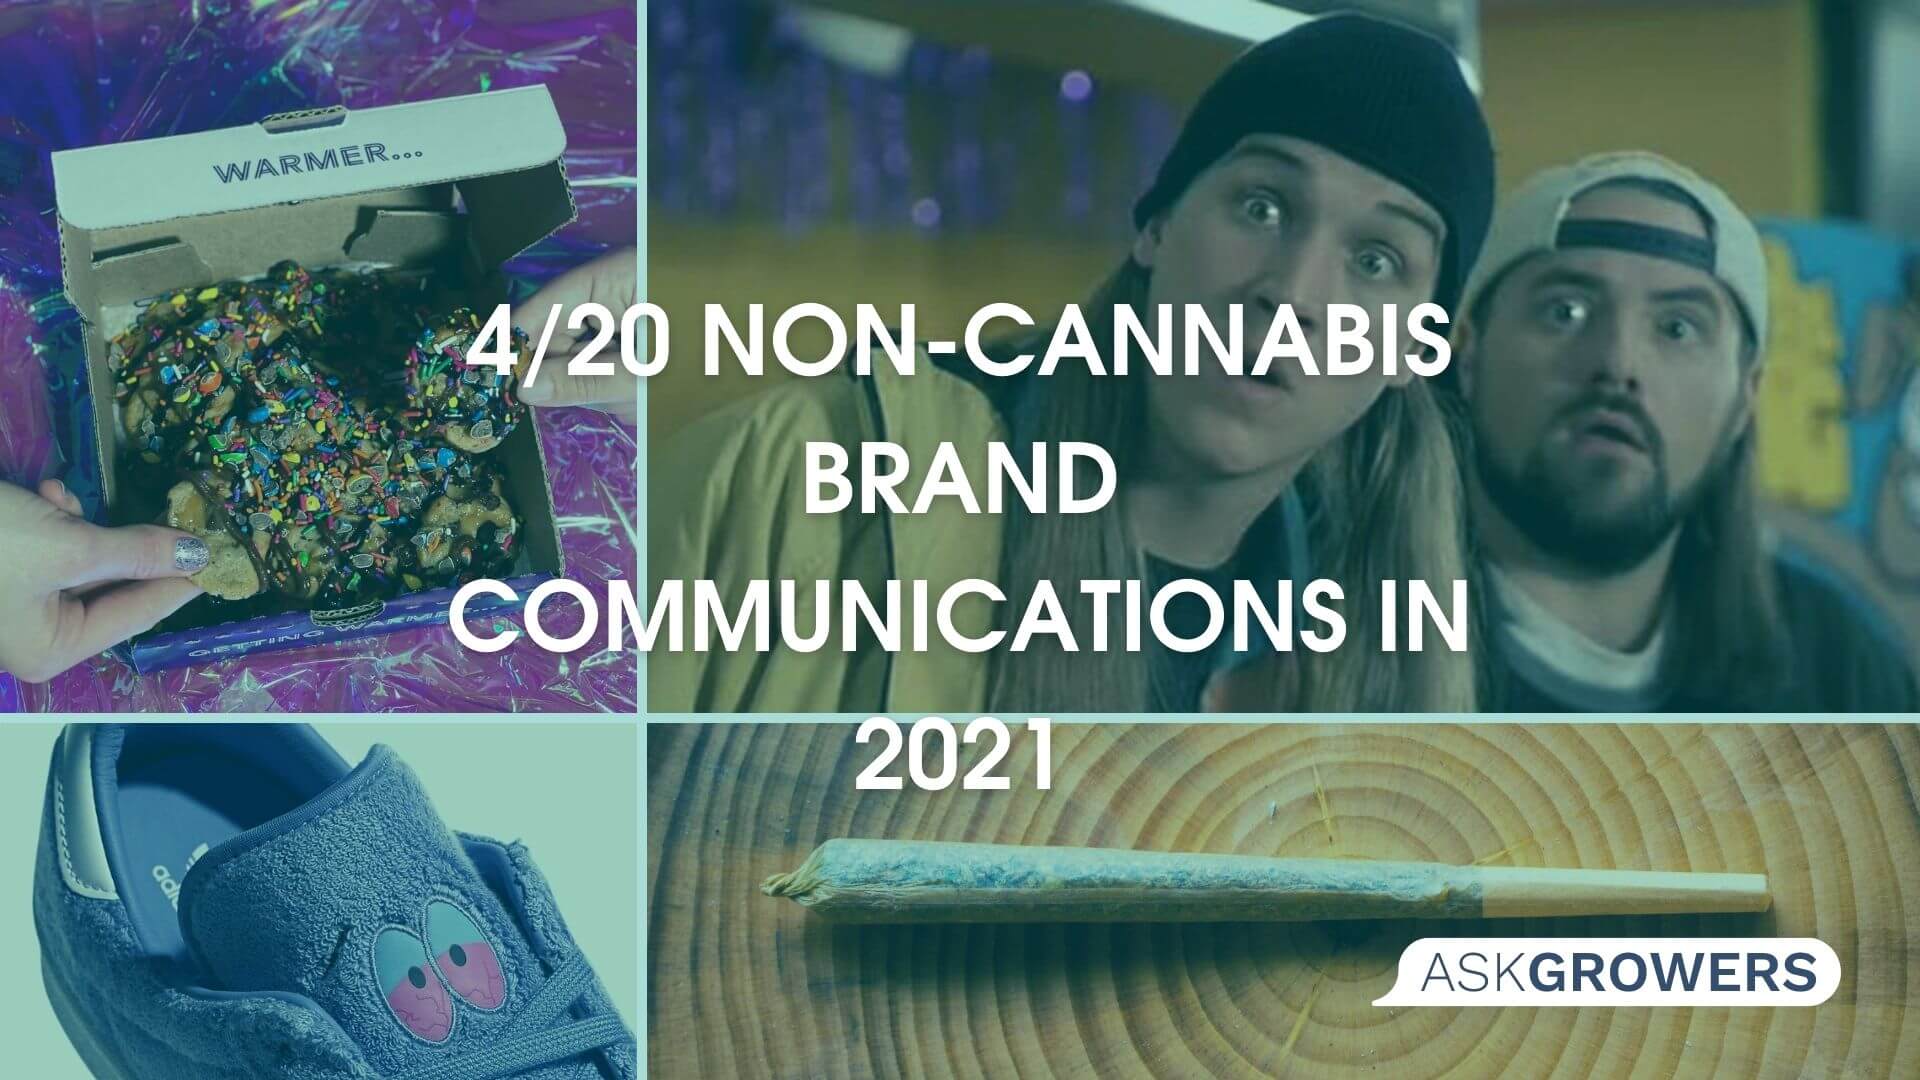 4/20 Non-Cannabis Brand Communications in 2021